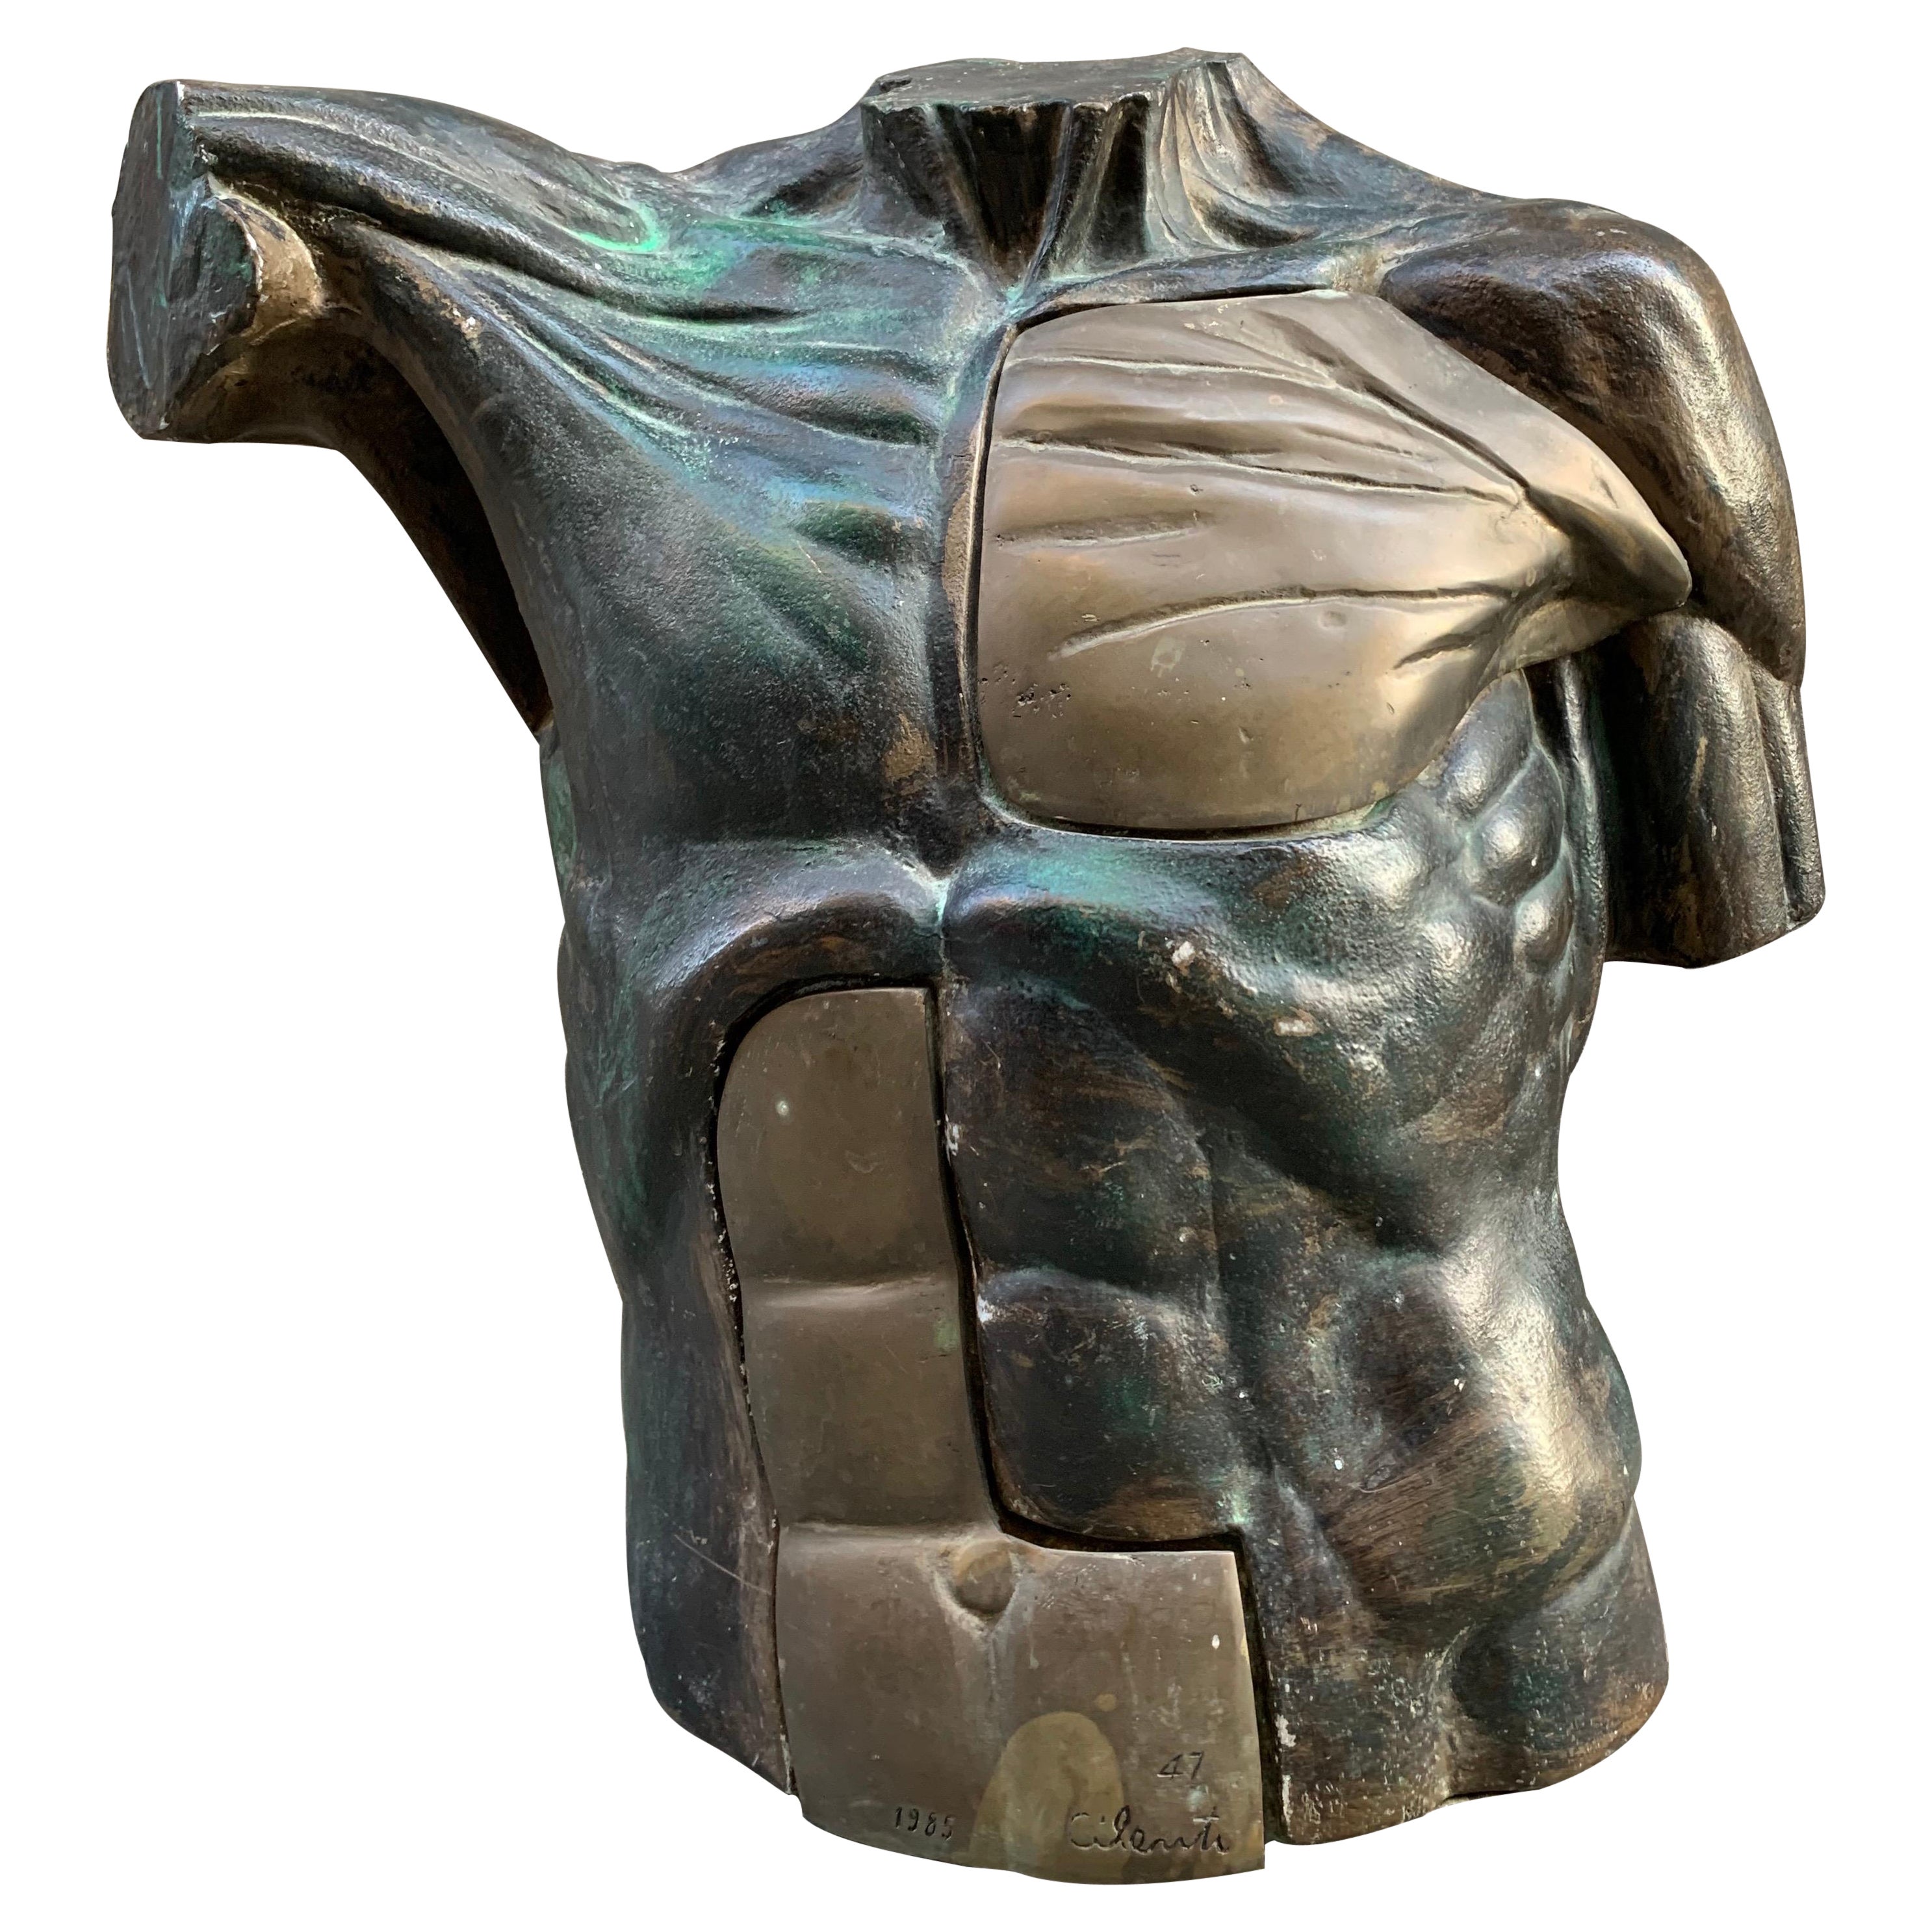 Bronze and Resin Bust of a Man, Signed by Cilenti, 1985